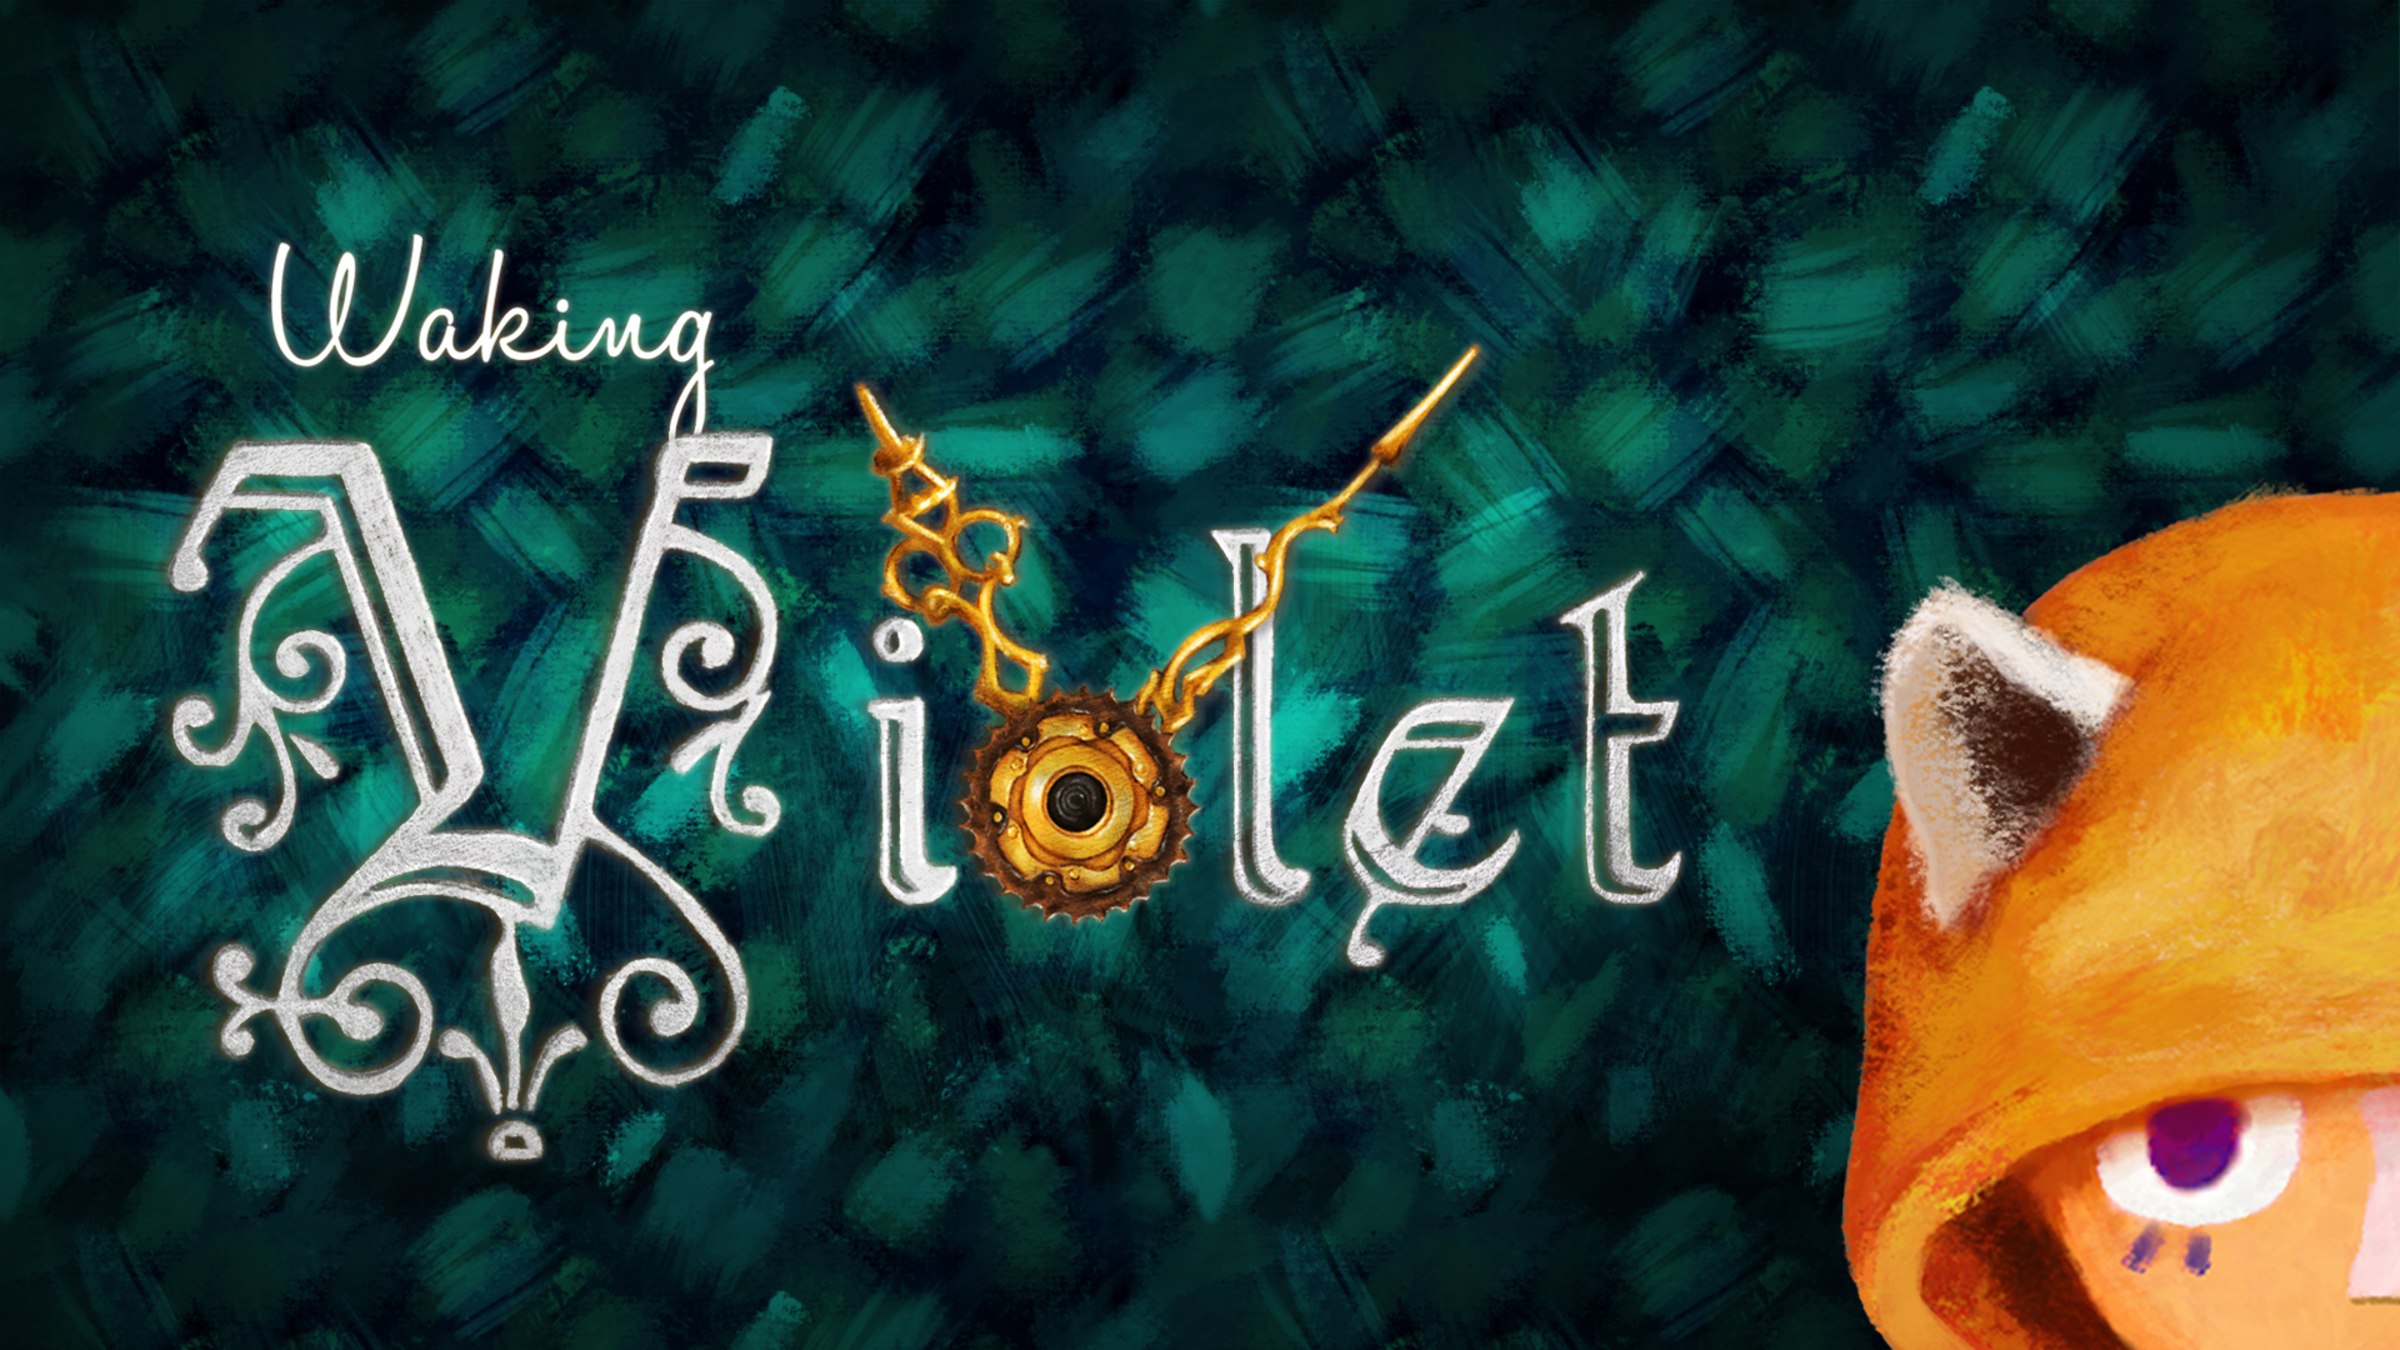 Waking Violet is a Classic 2-D Top-Down Puzzle With Some Fun Twists